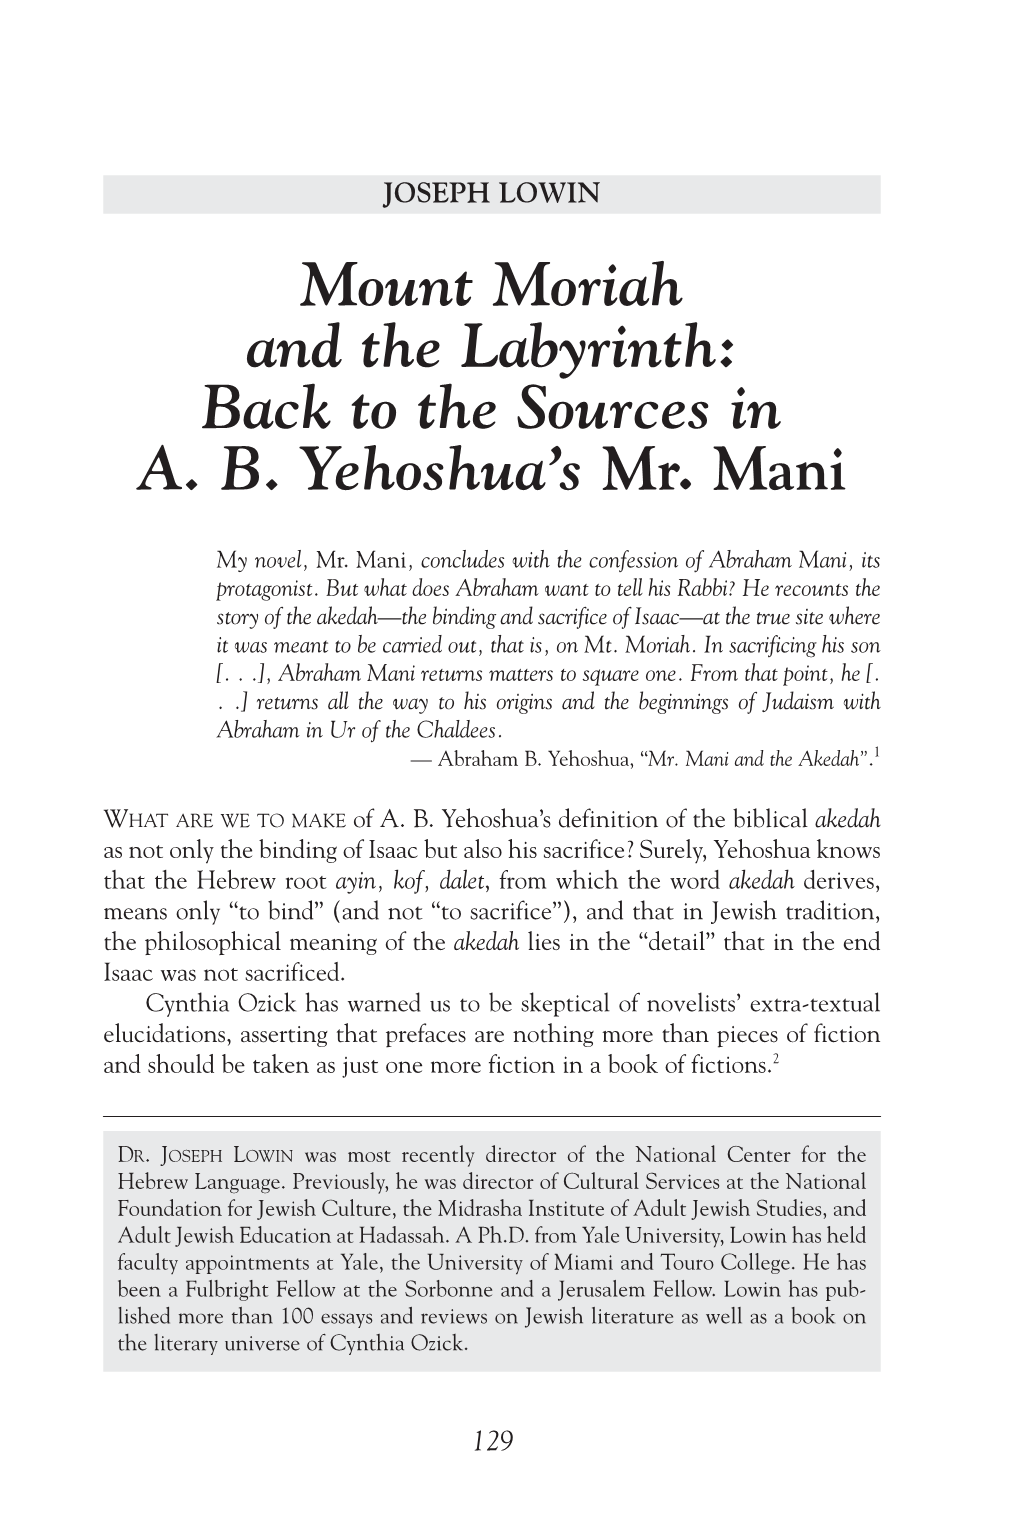 Mount Moriah and the Labyrinth: Back to the Sources in A. B. Yehoshua's